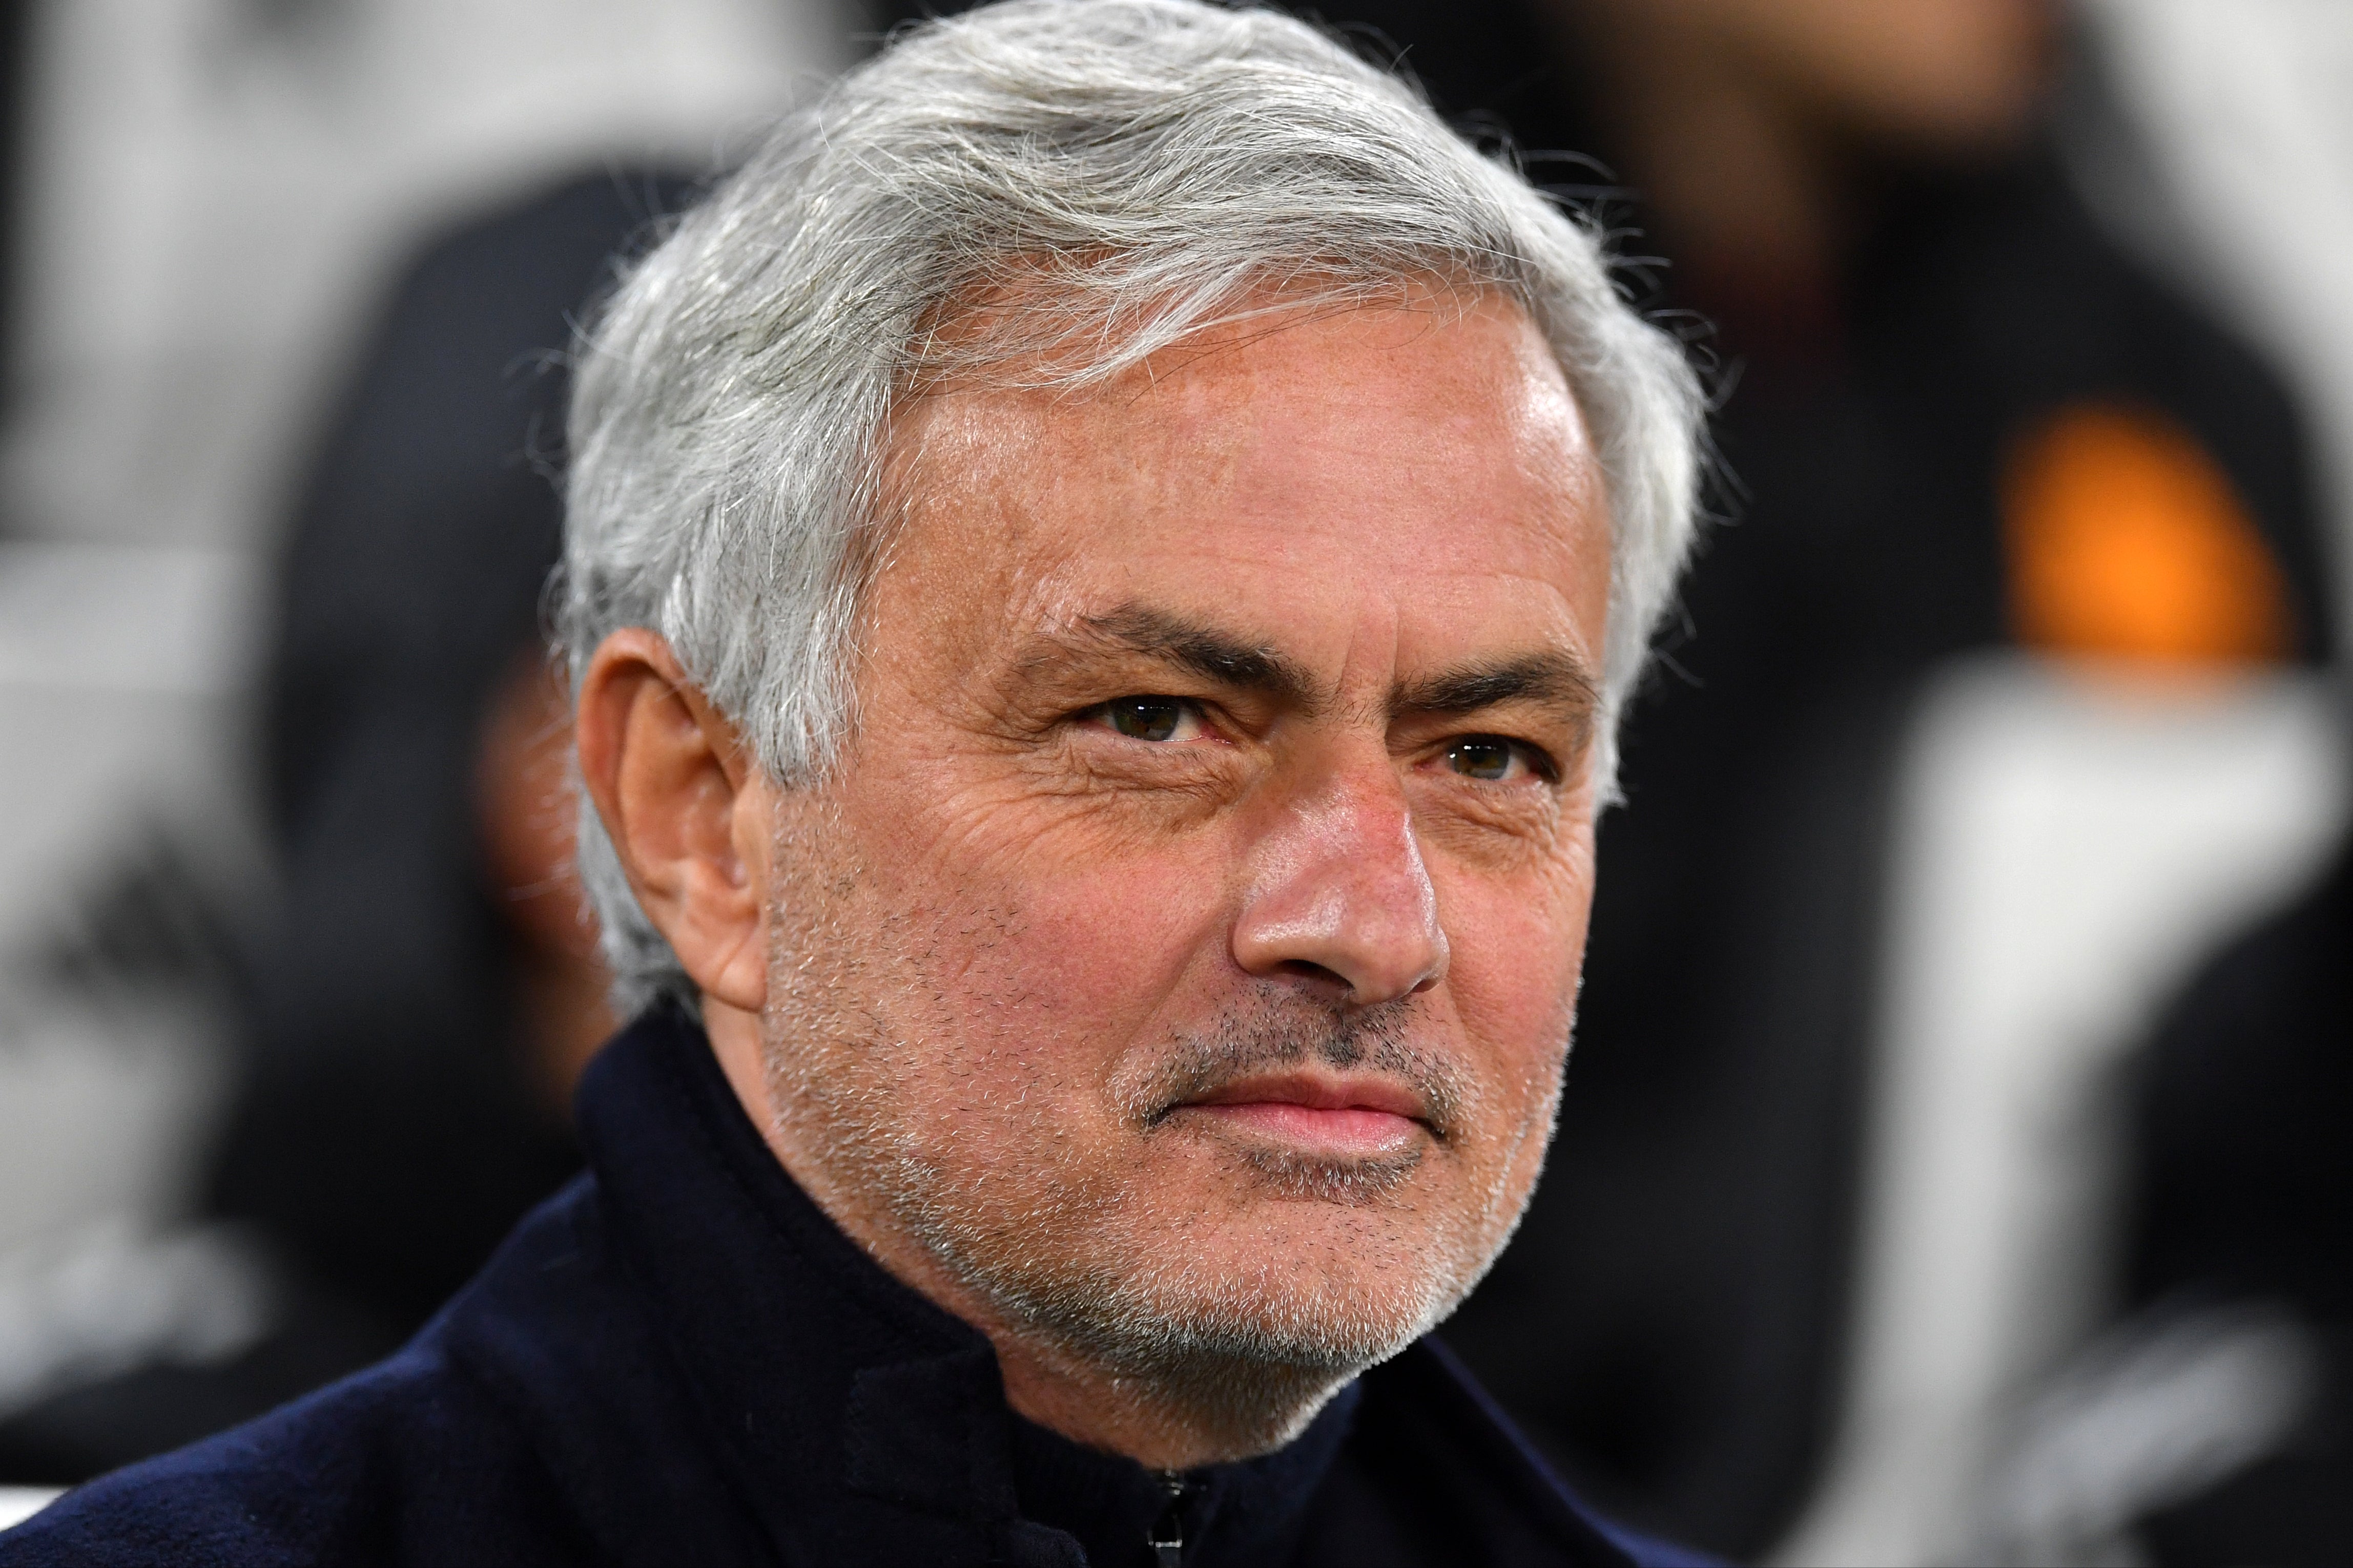 Jose Mourinho has been sacked by Roma after two-and-a-half years